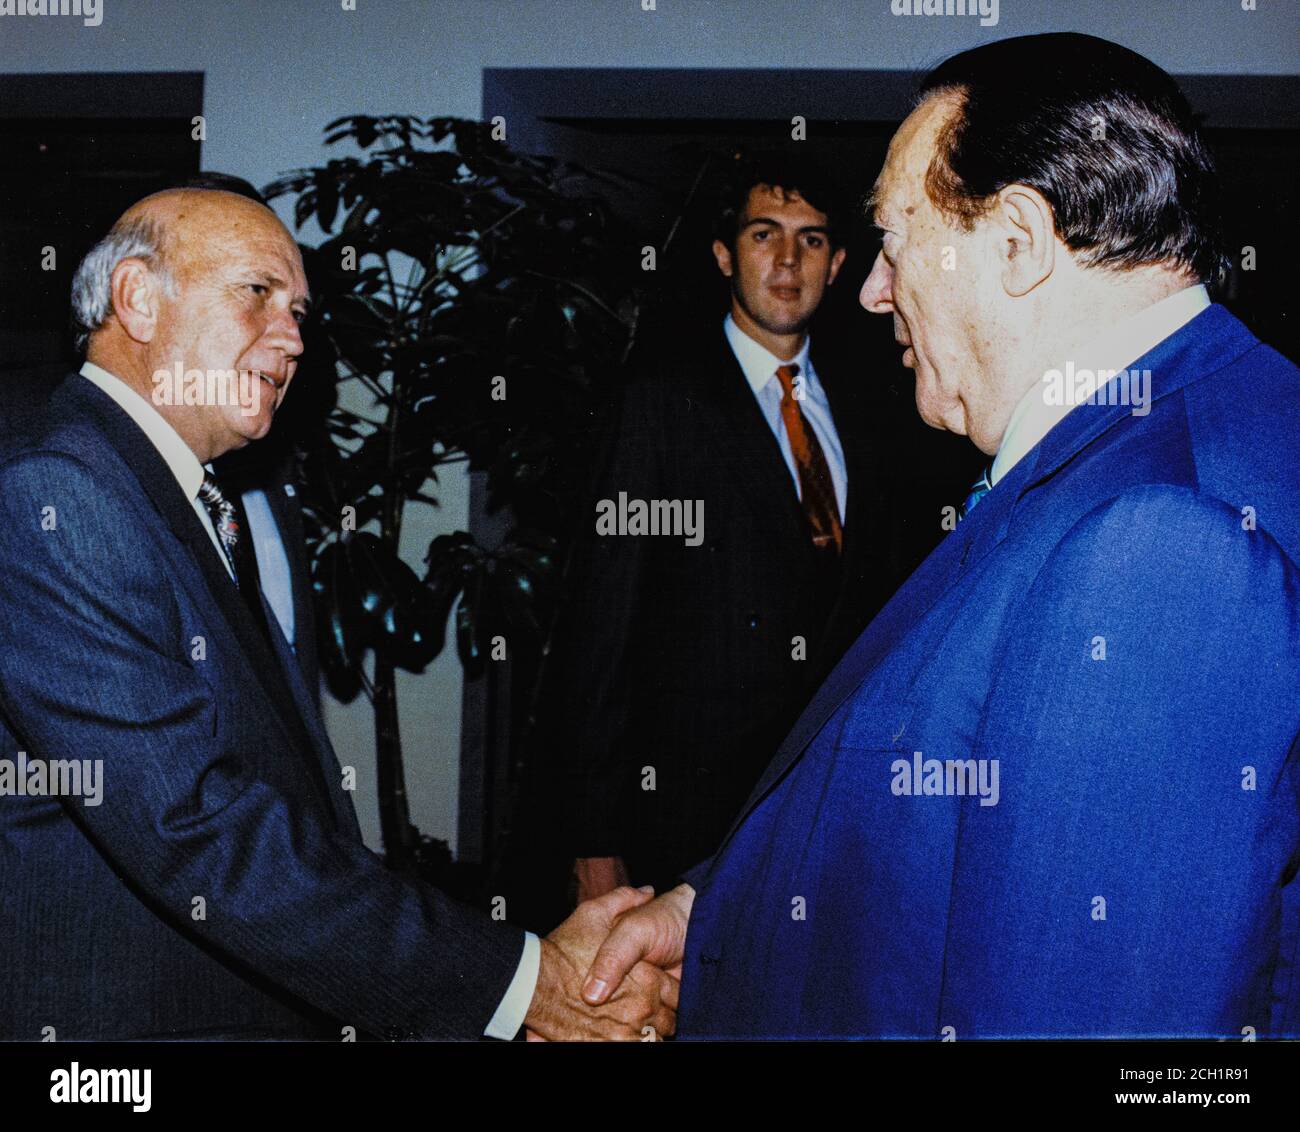 In this file photo from September 25, 1990, disgraced publisher Robert Maxwell, right, meets President F.W. DeKlerk of South Africa in Washington, DC on September 25, 1990. The New York Post is reporting today that Maxwell, through his daughter Ghislaine Maxwell, may have been the source the huge fortune amassed by alleged pedophile Jeffrey Epstein, who hanged himself in his Manhattan lockup last August.Credit: Ron Sachs/CNP | usage worldwide Stock Photo